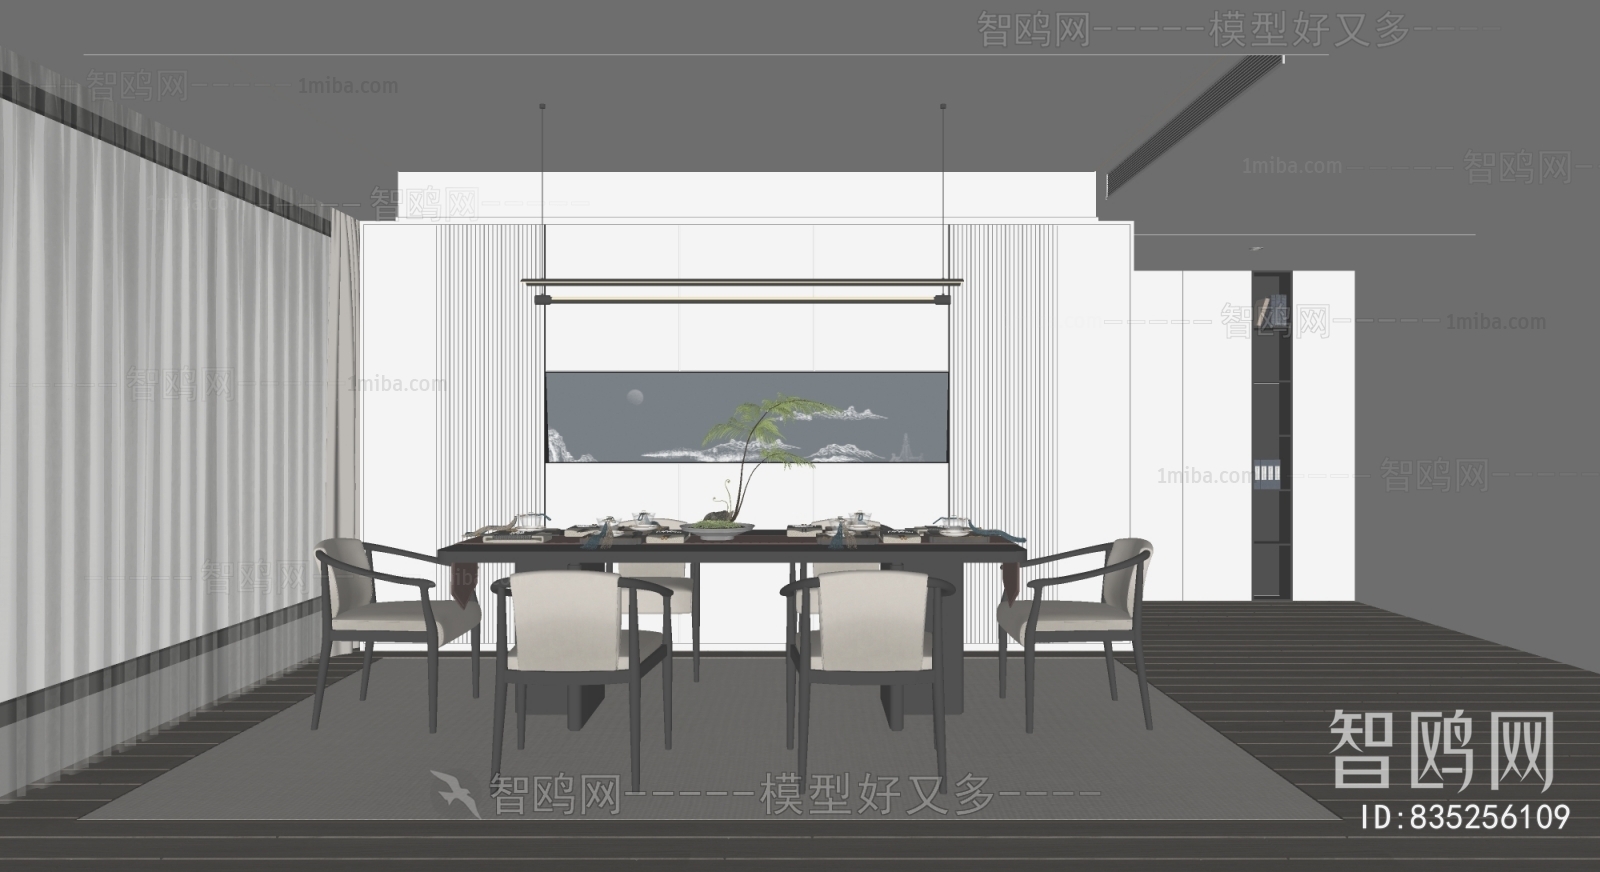 Modern New Chinese Style Dining Room